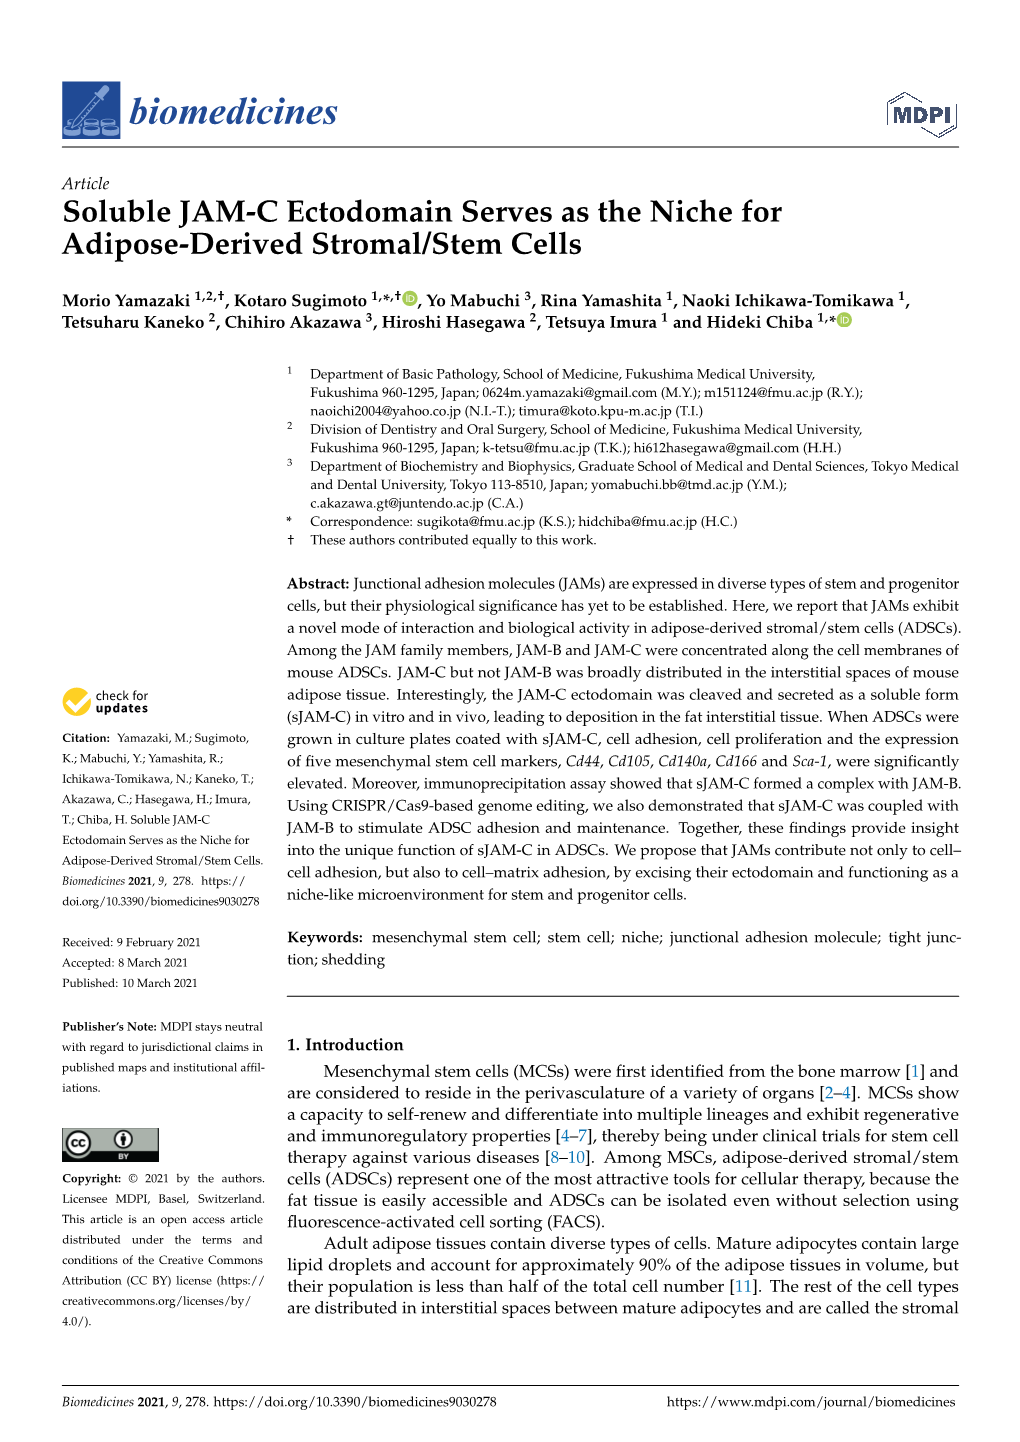 Soluble JAM-C Ectodomain Serves As the Niche for Adipose-Derived Stromal/Stem Cells